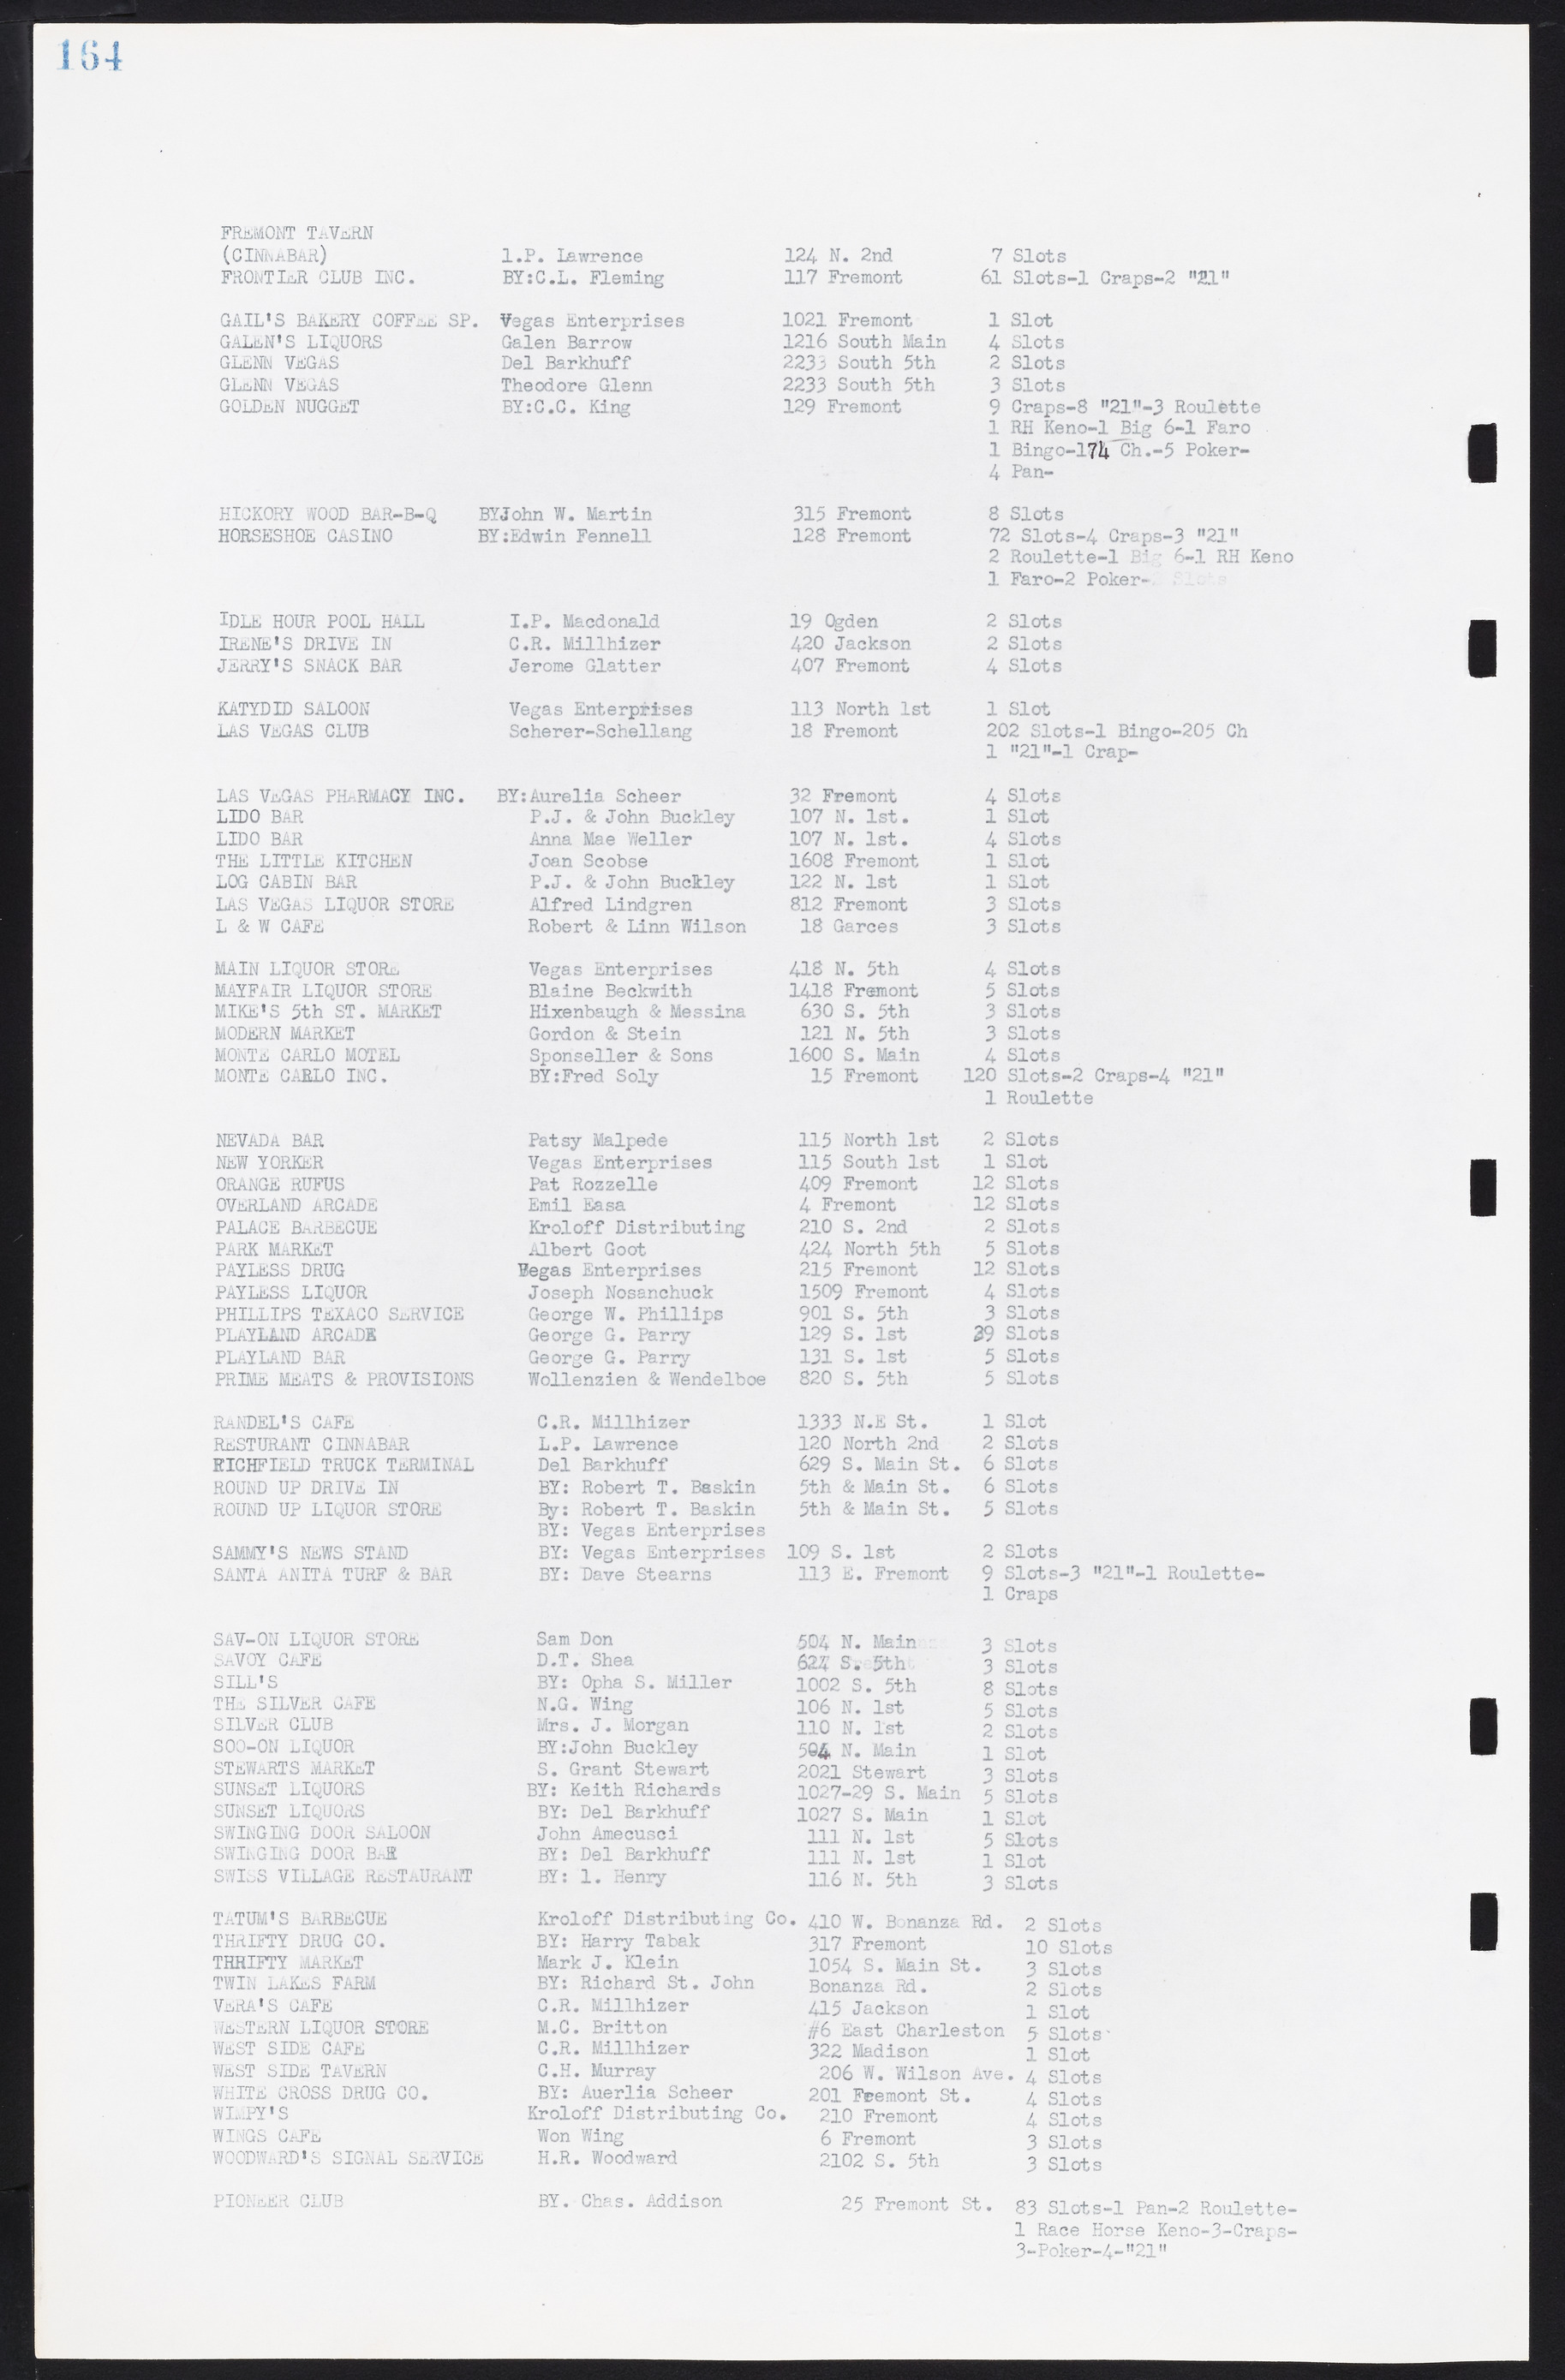 Las Vegas City Commission Minutes, May 26, 1952 to February 17, 1954, lvc000008-178